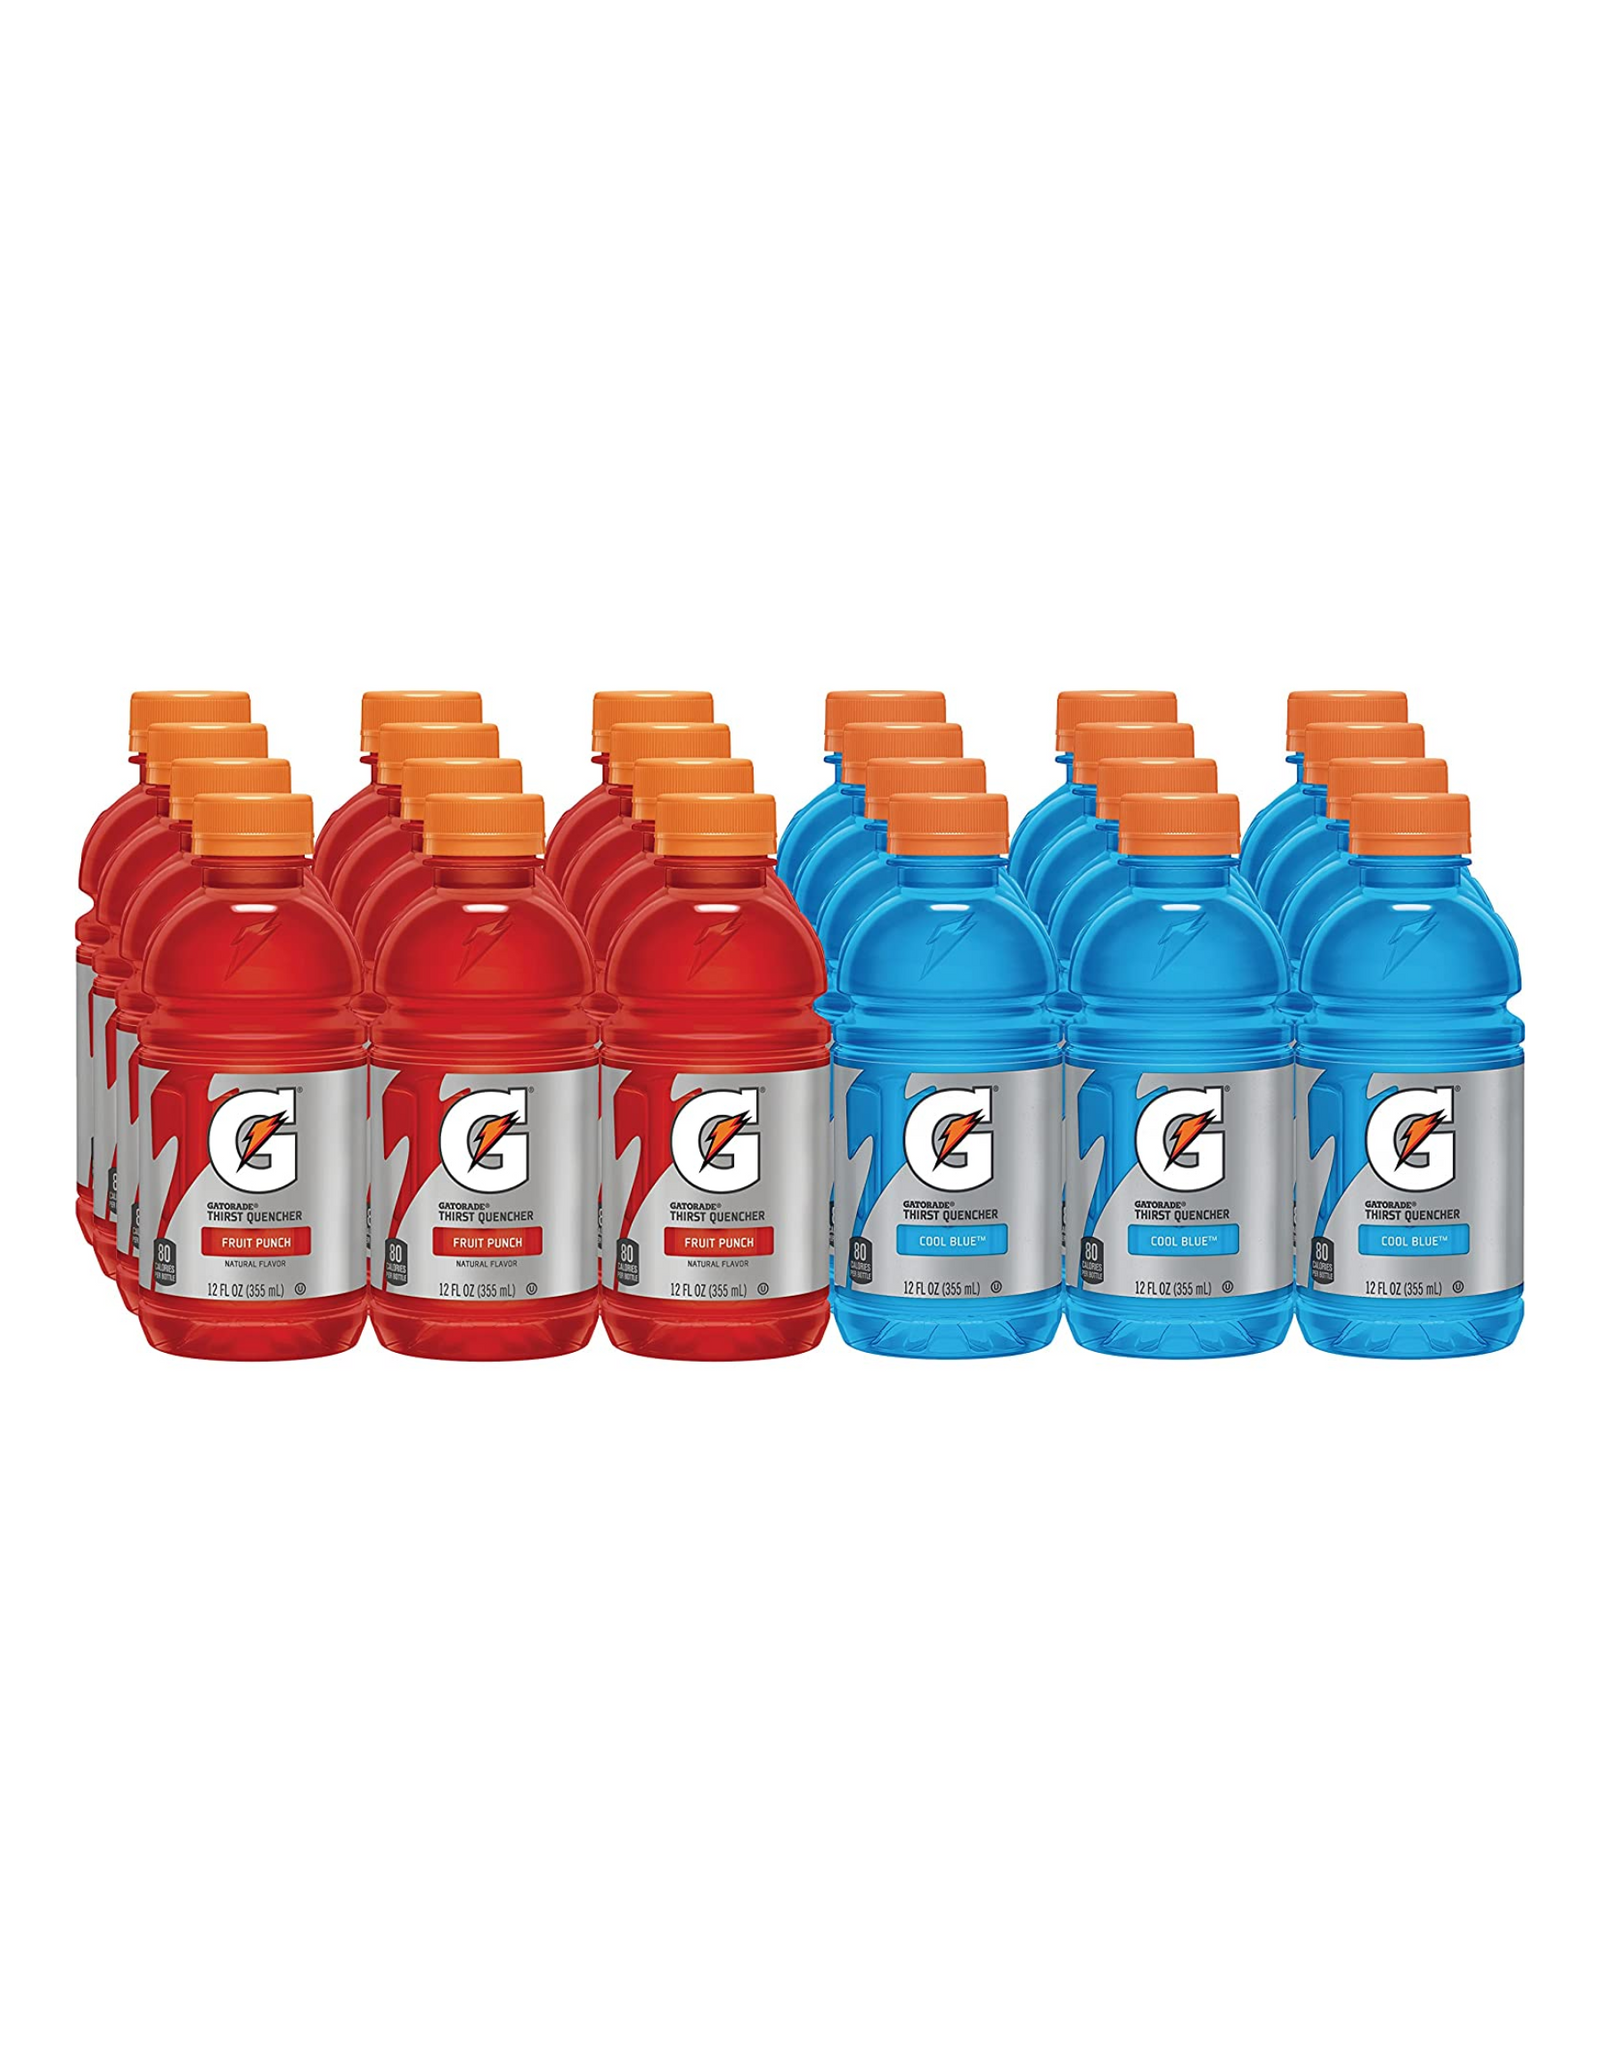 Gatorade Thirst Quencher, Fruit Punch and Cool Blue Variety Pack, 12 Ounce - Pack of 24